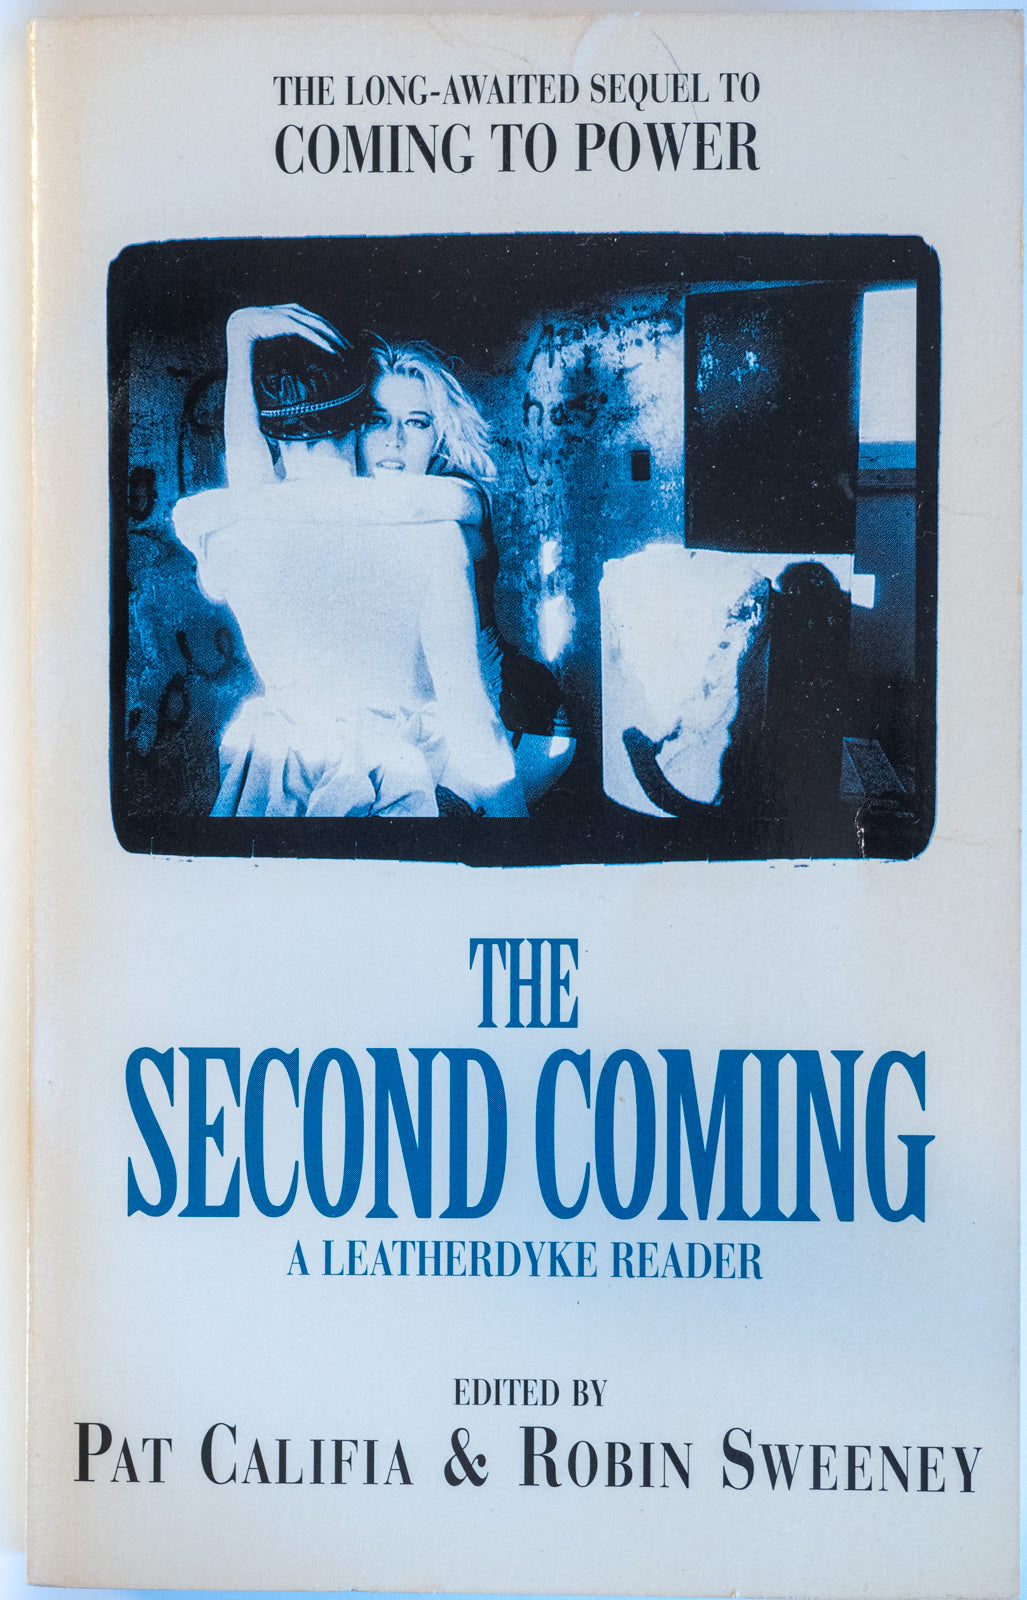 The Second Coming : a leatherdyke reader. Pat Califia & Robin Sweeney